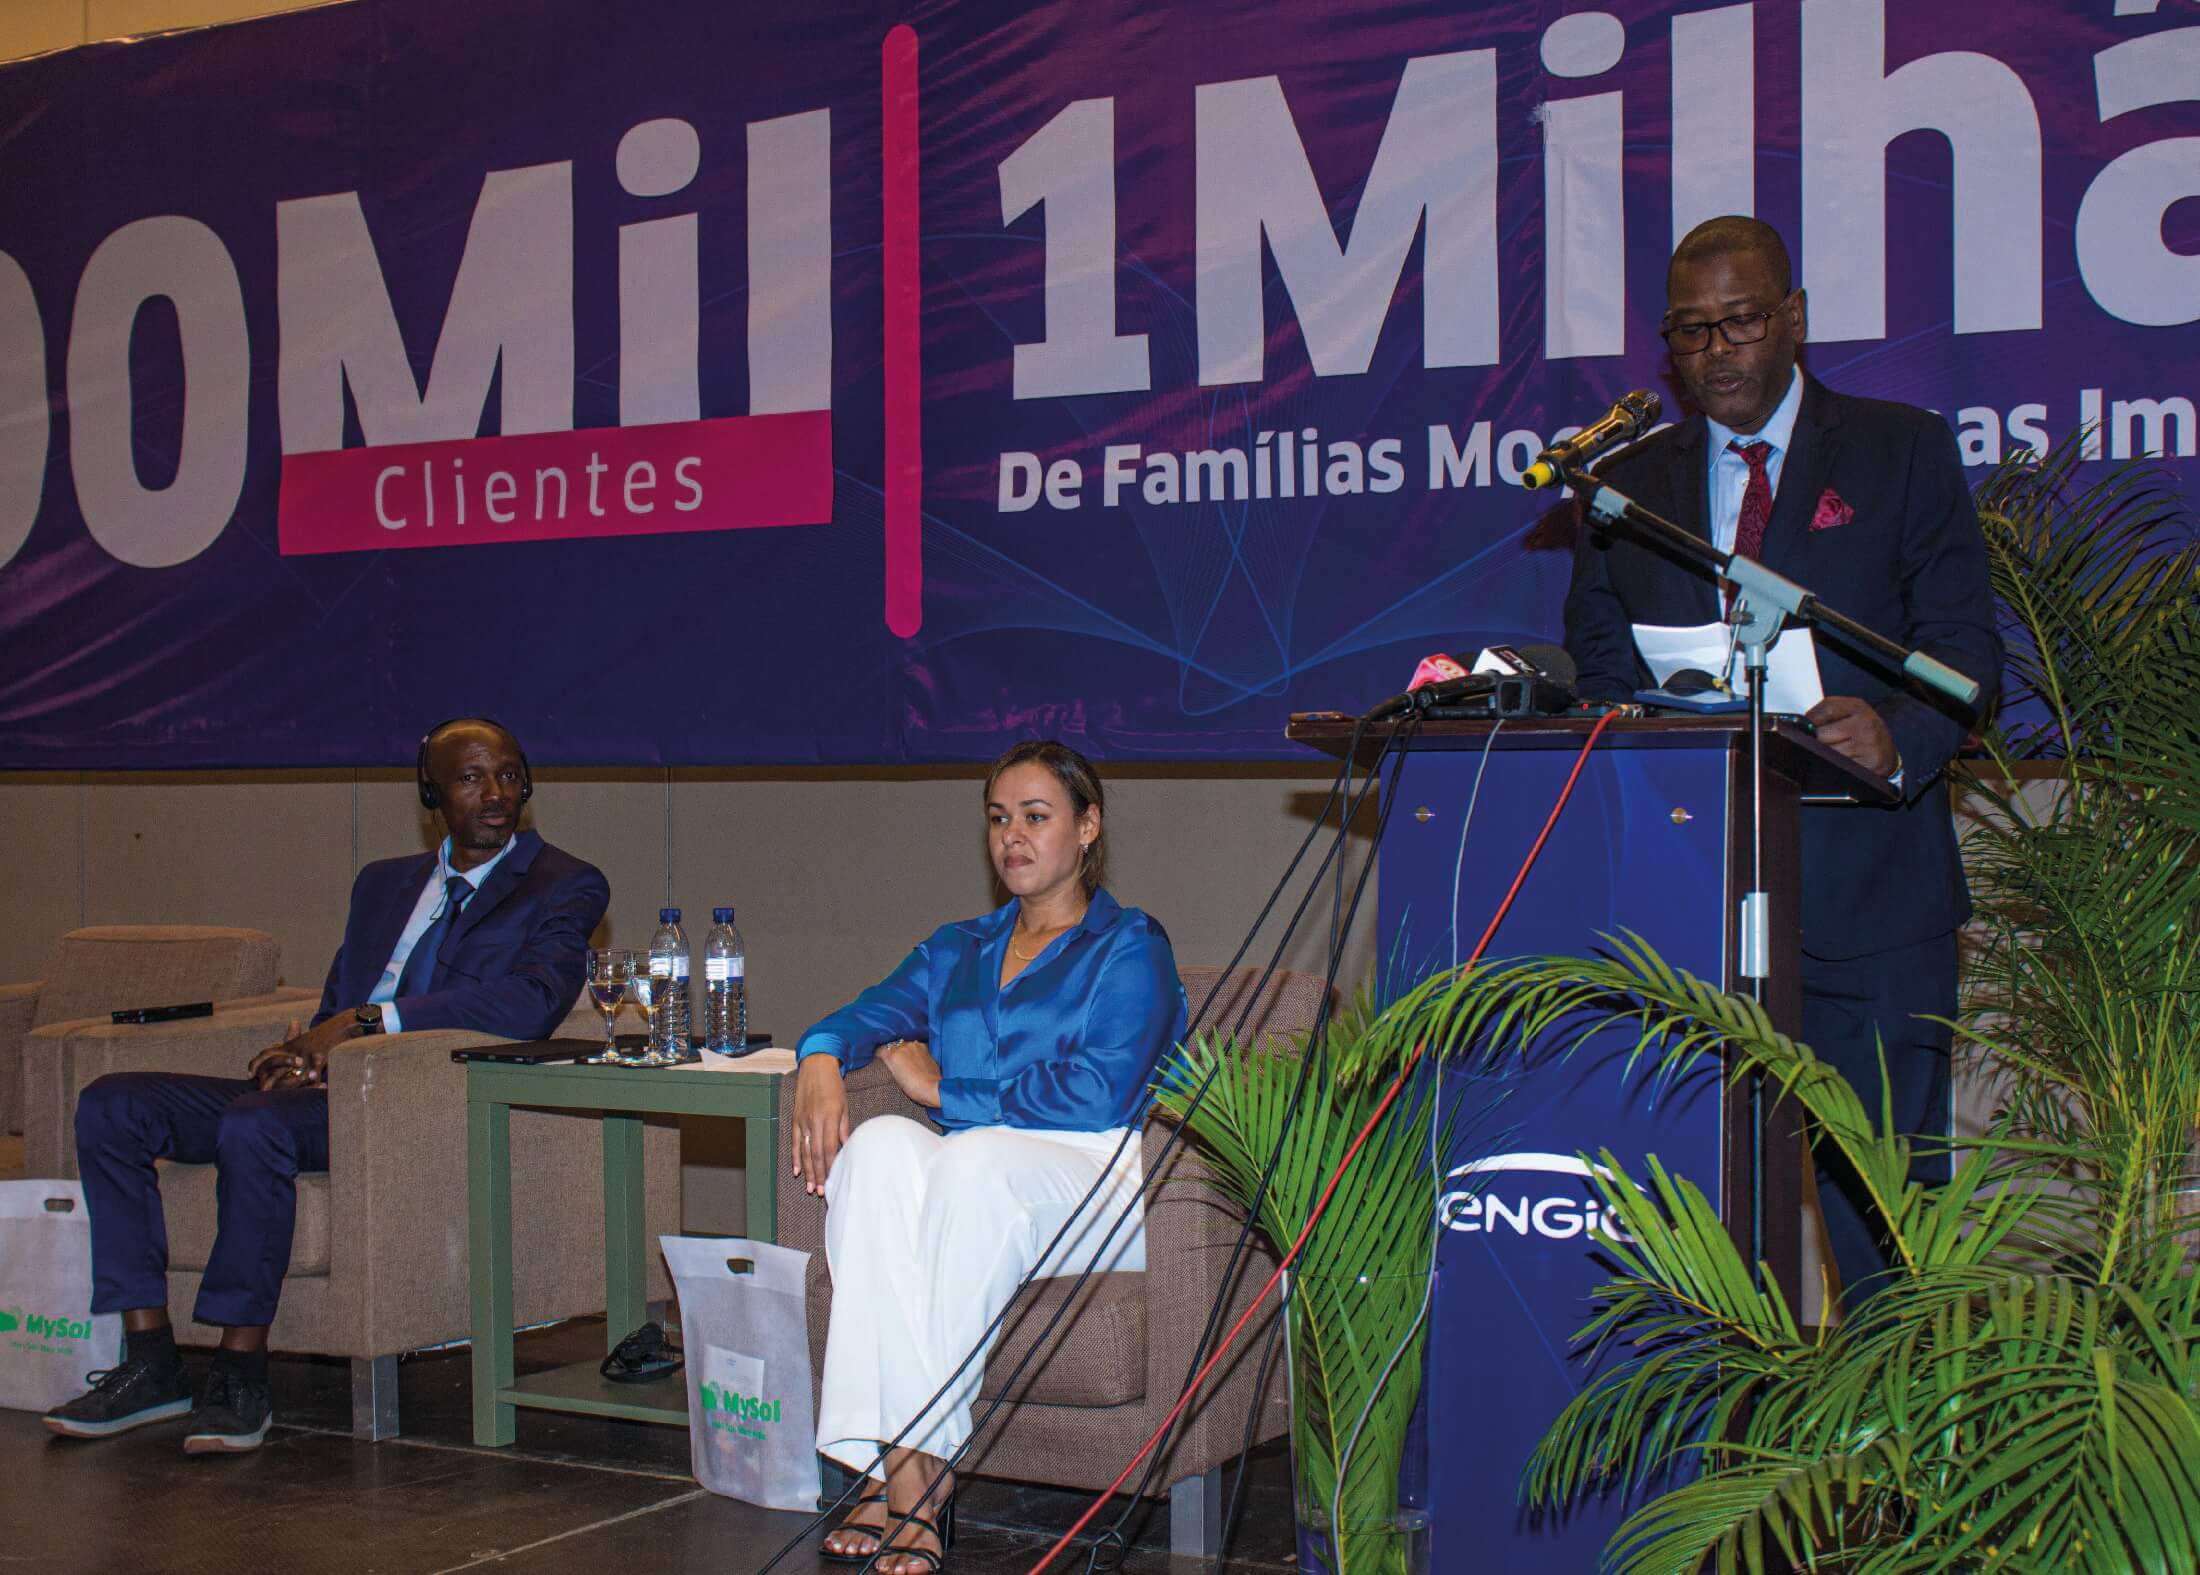 ENGIE Energy Access Mozambique celebrates 200,000 customer milestone on 4th anniversary and signed a Memorandum of Understanding with Foundation for Community Development (FDC)